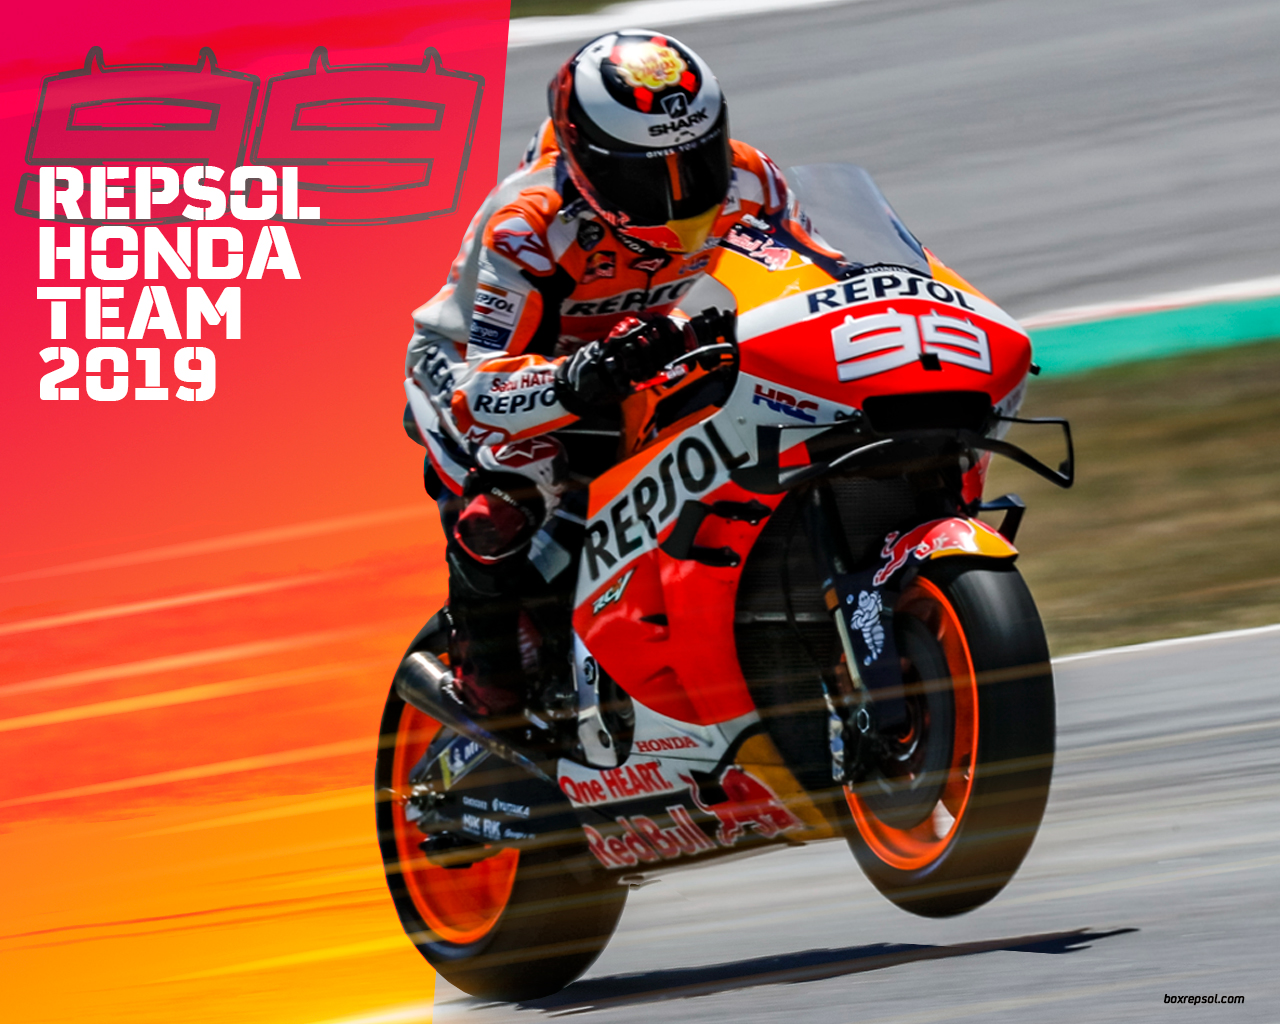 Motogp And Trial Wallpapers And Other Downloads Box - Jorge Lorenzo Wallpaper 2019 - HD Wallpaper 